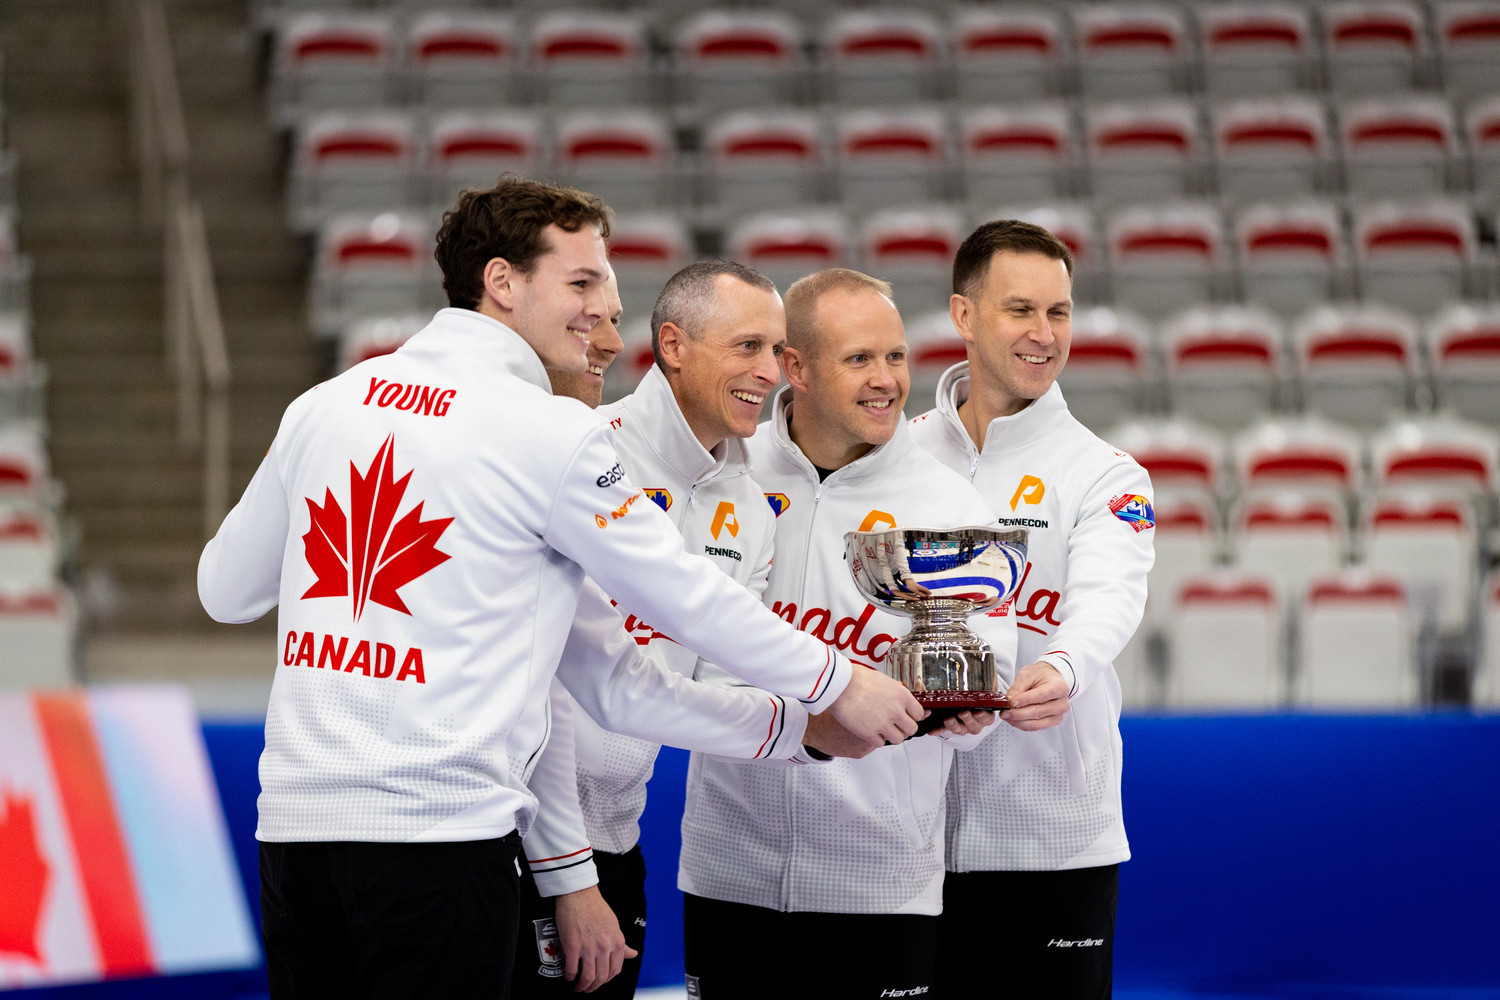 Canada won the men's title at the inaugural Pan Continental Curling Championships in Calgary ©WCF/Howard Lao